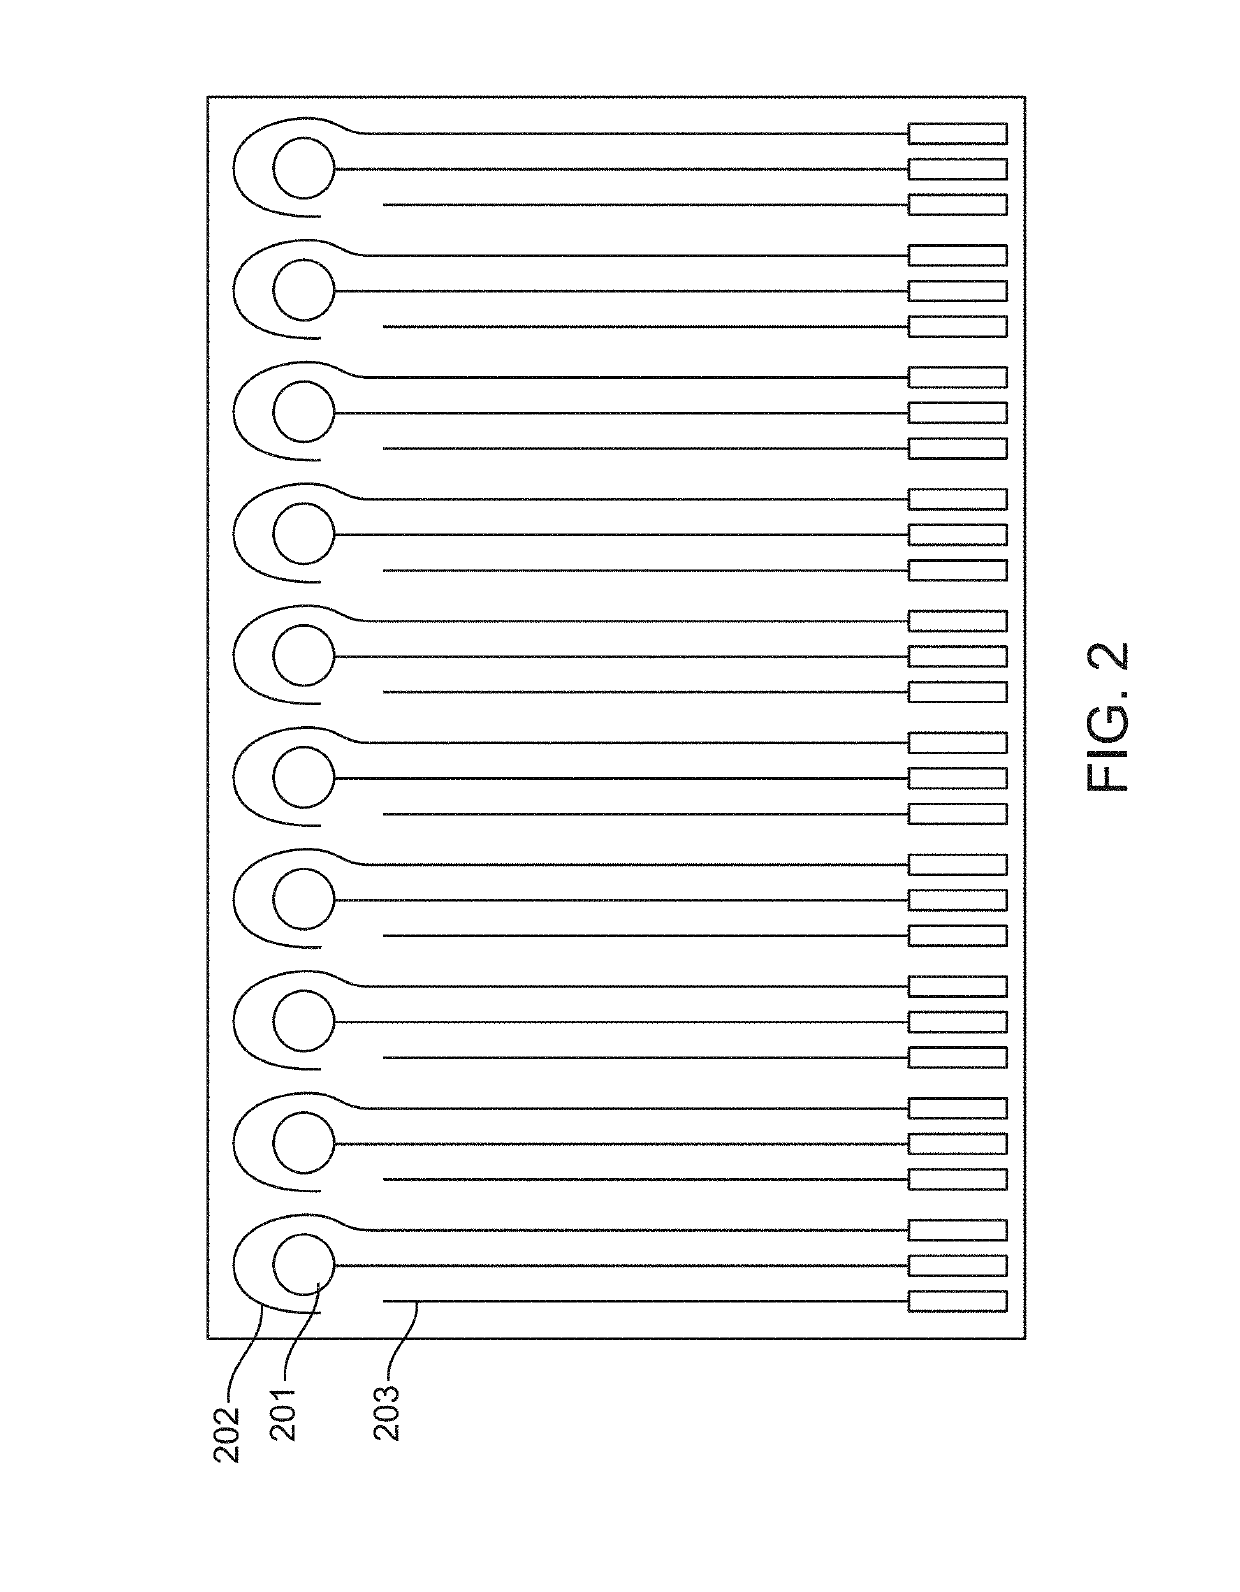 Lab on a chip device for multi-analyte detection and a method of fabrication thereof